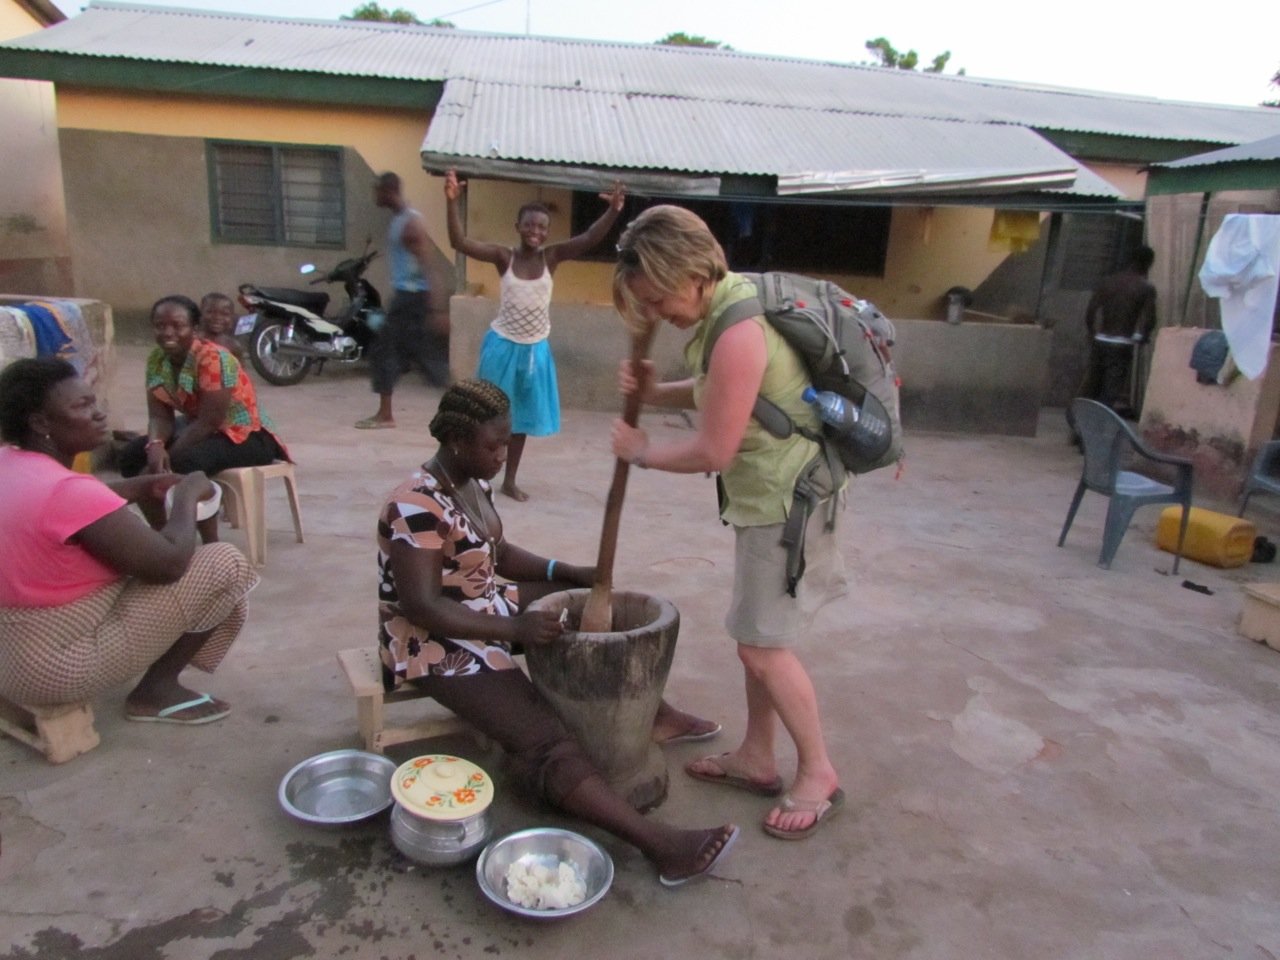 WORKING HARD- Pictured here is City Councillor Cindy Jefferies making foo-foo which is pounded boiled yam. She recently travelled to Ghana with Tools for Schools Africa to meet with young women who received scholarships from the program.